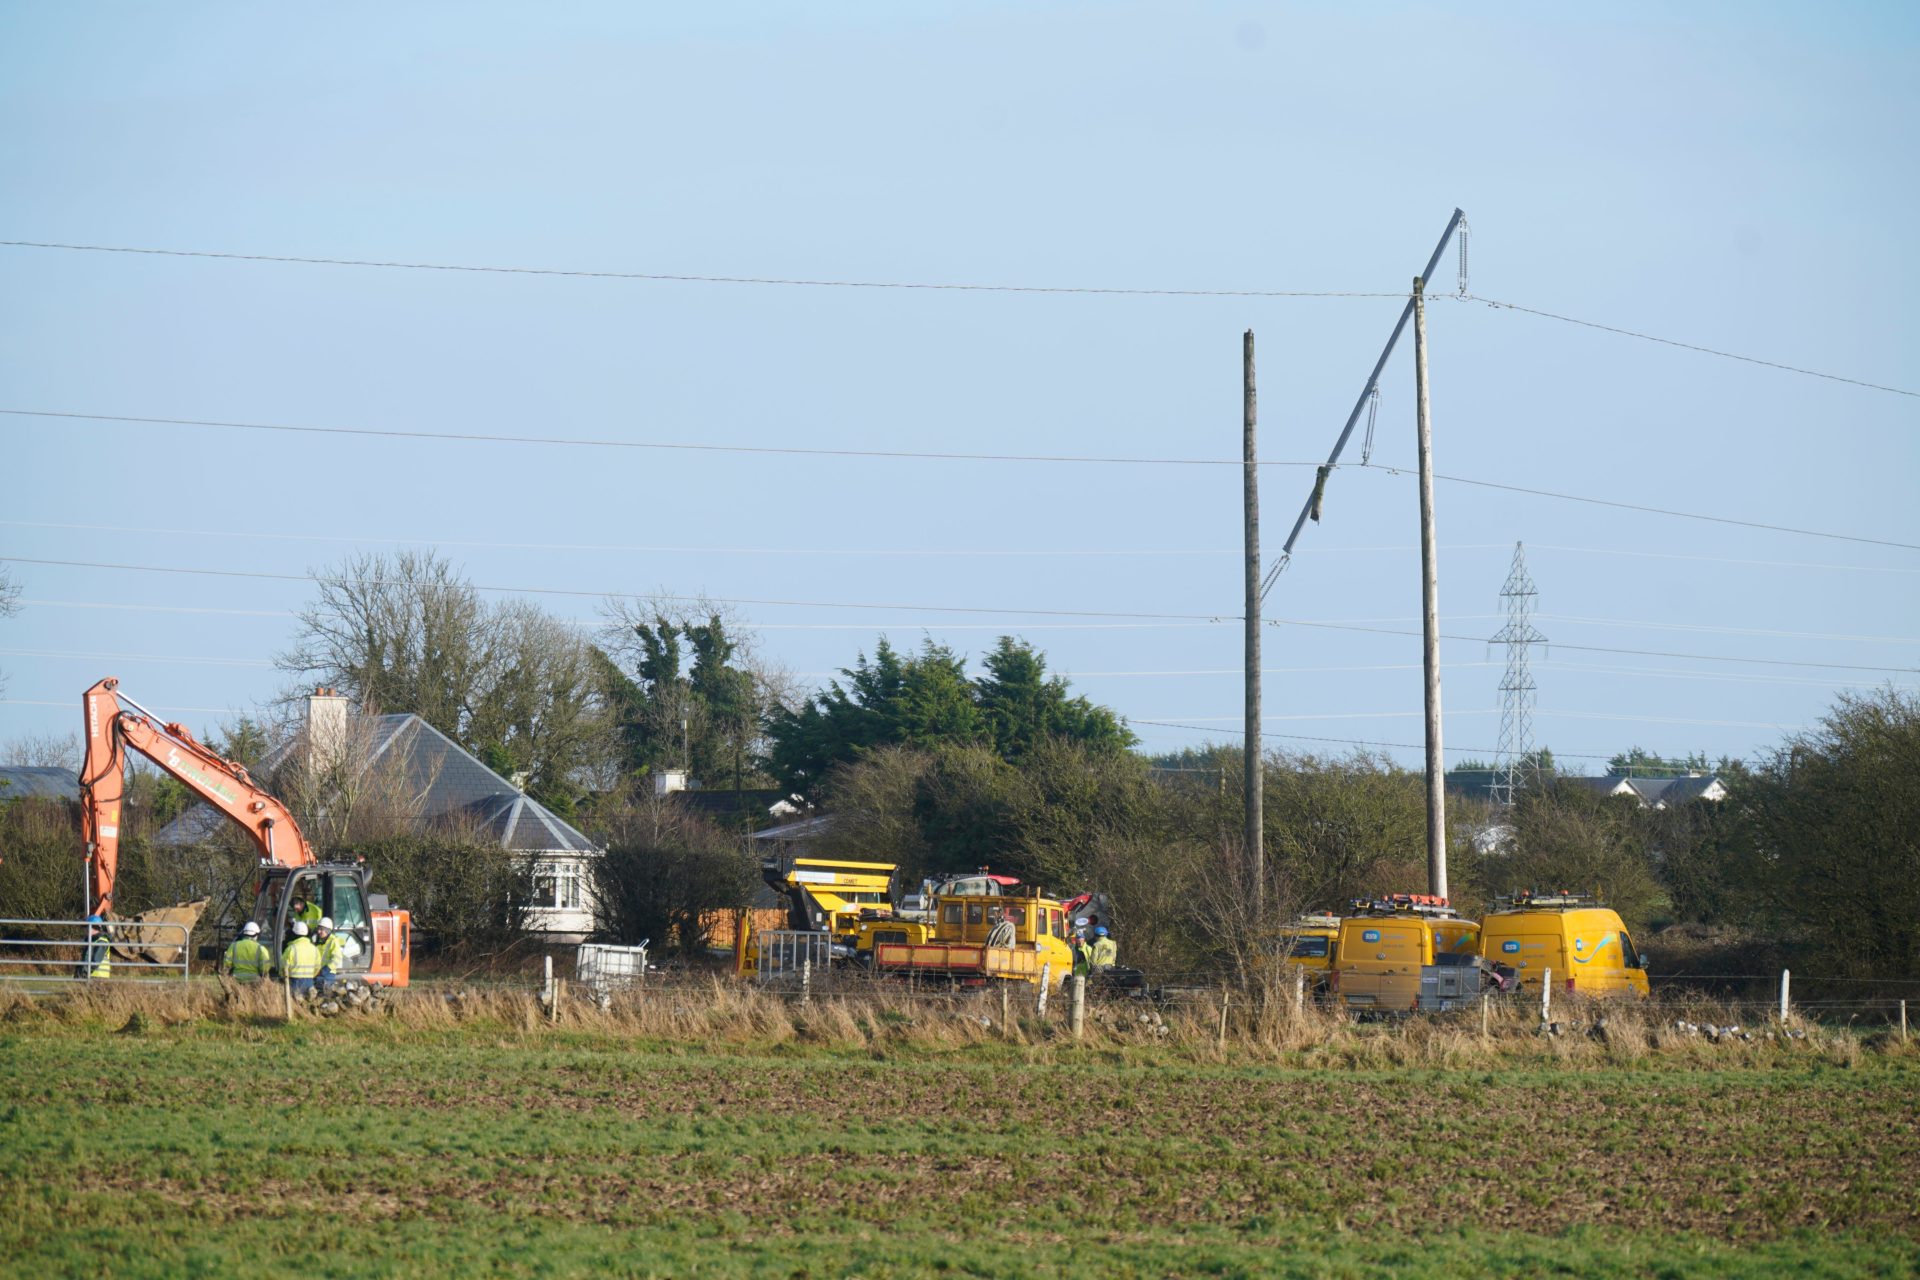 Crews from ESB Networks replace fallen electricity pylons in a field near Galway airport following Storm Isha. Image: PA Images / Alamy Stock Photo